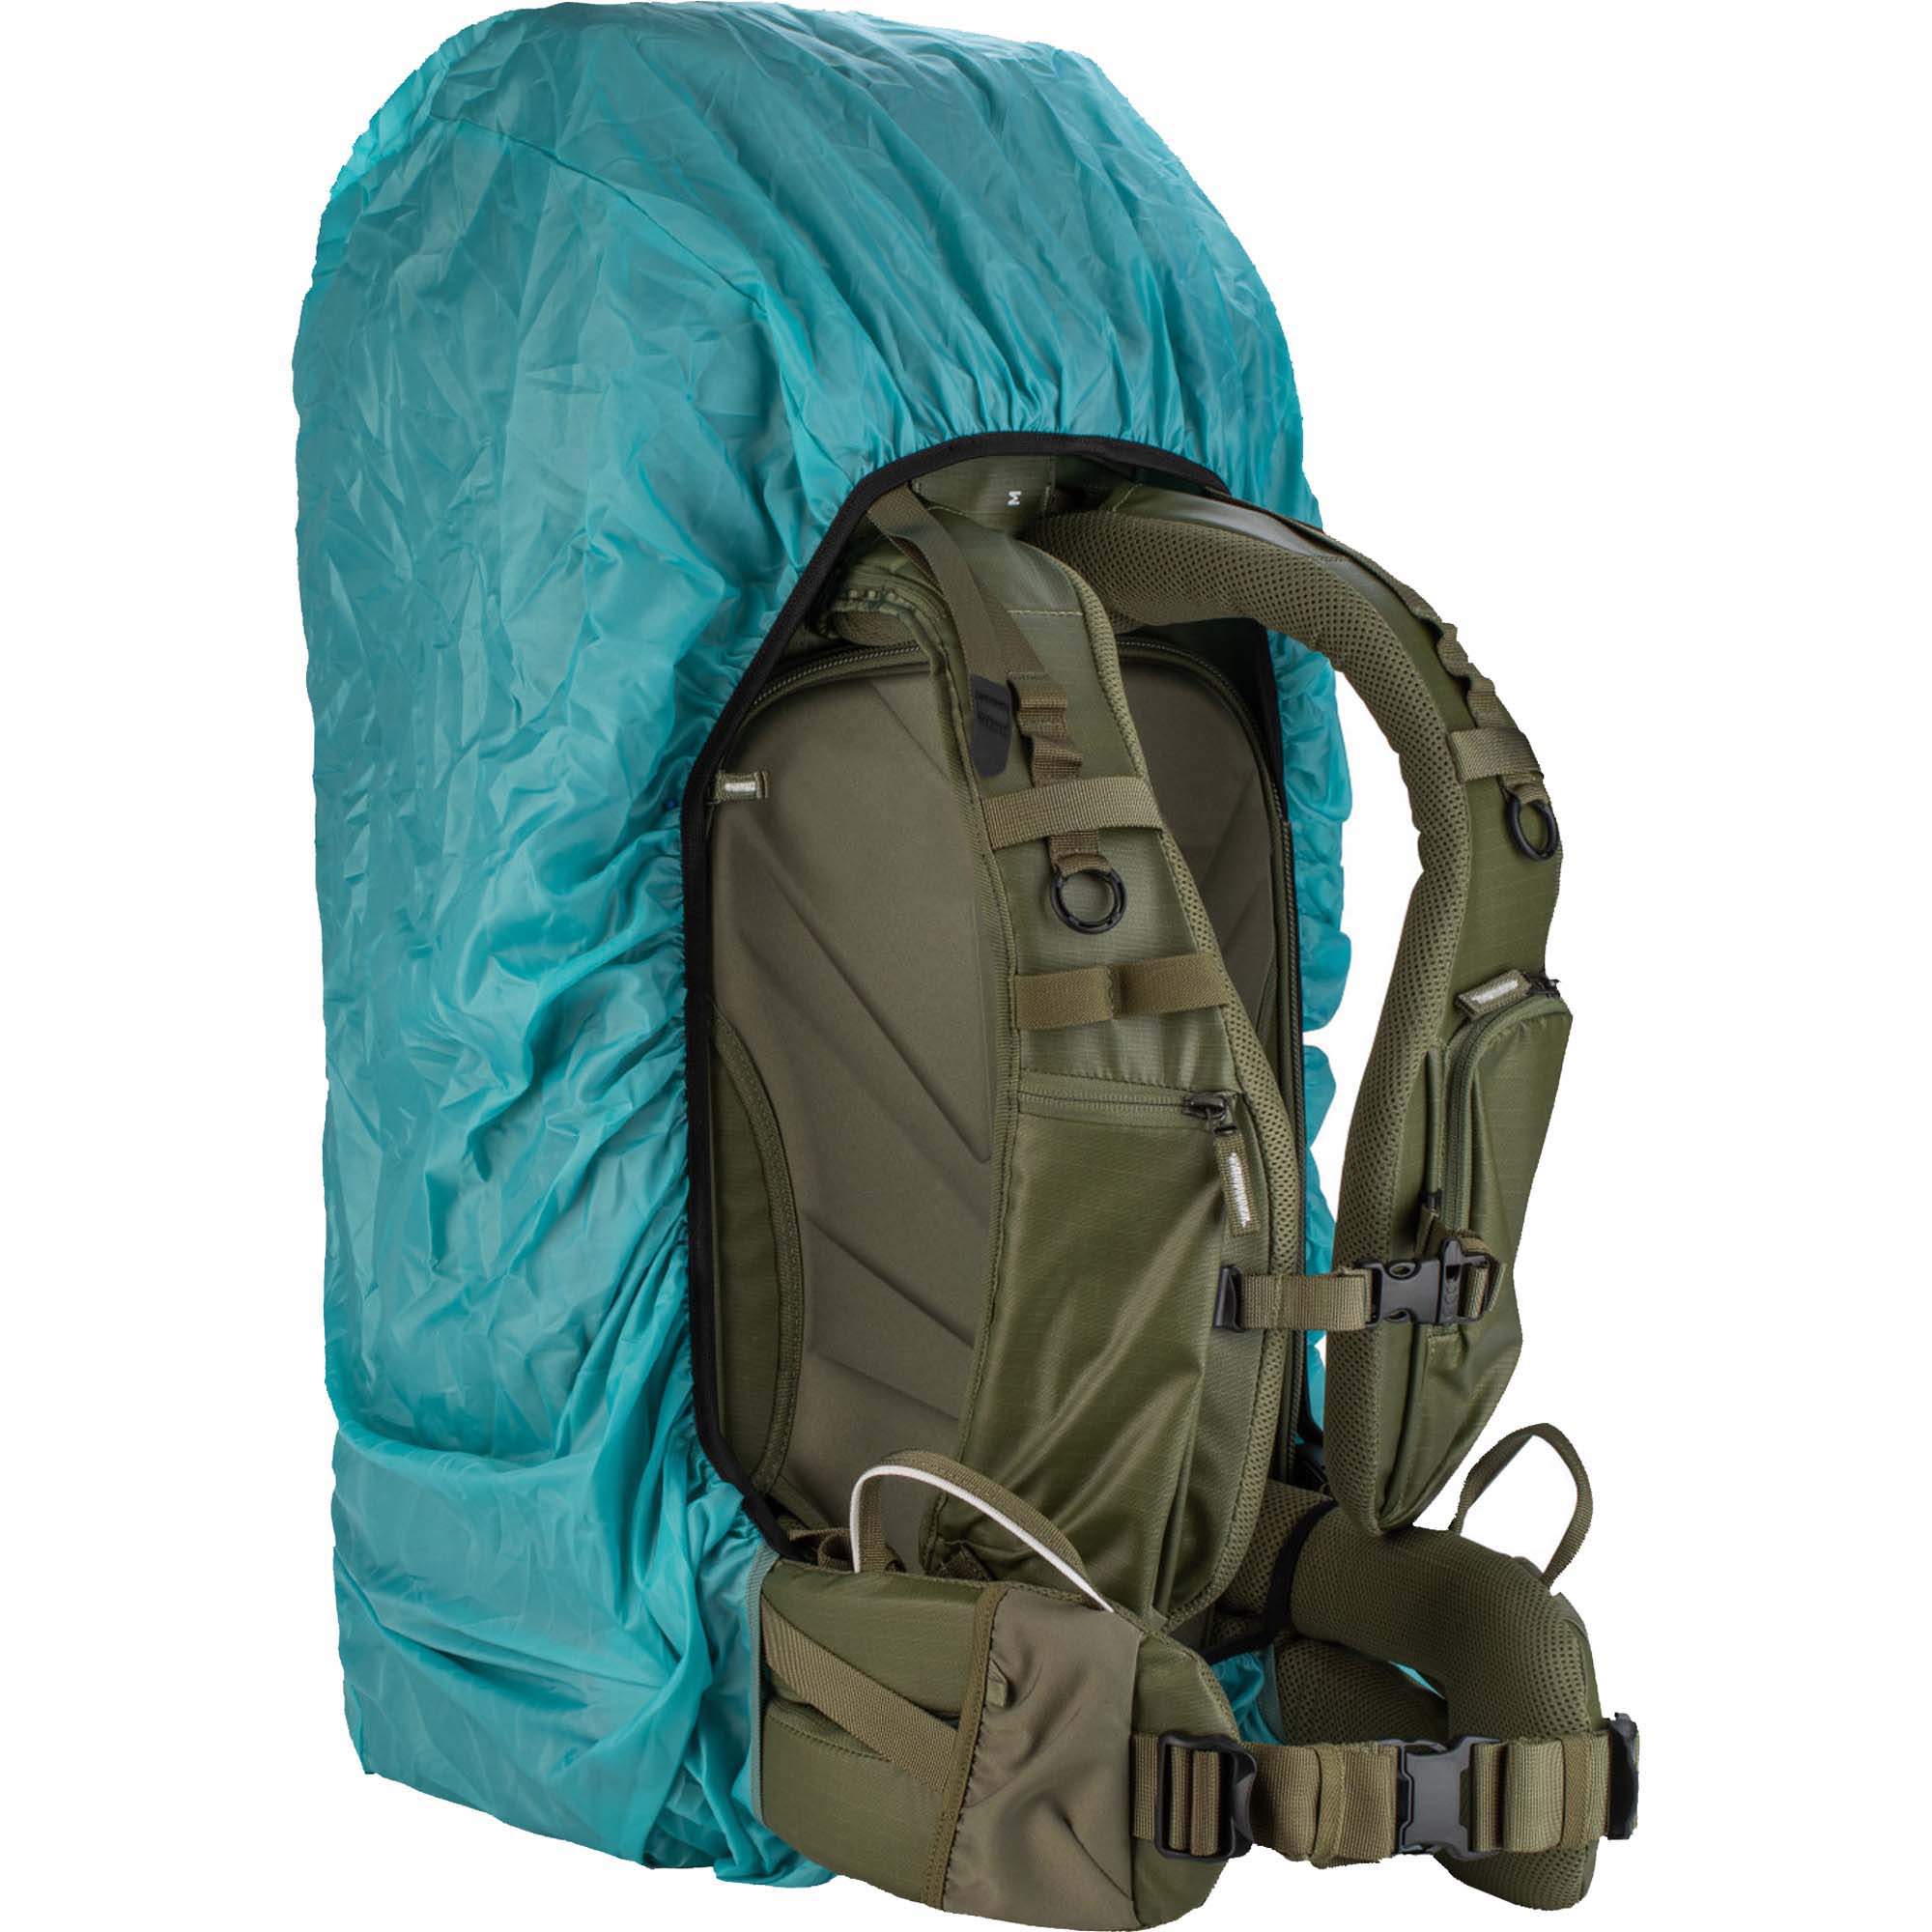 Shimoda Rain Cover for 70L Backpacks Weather Protector